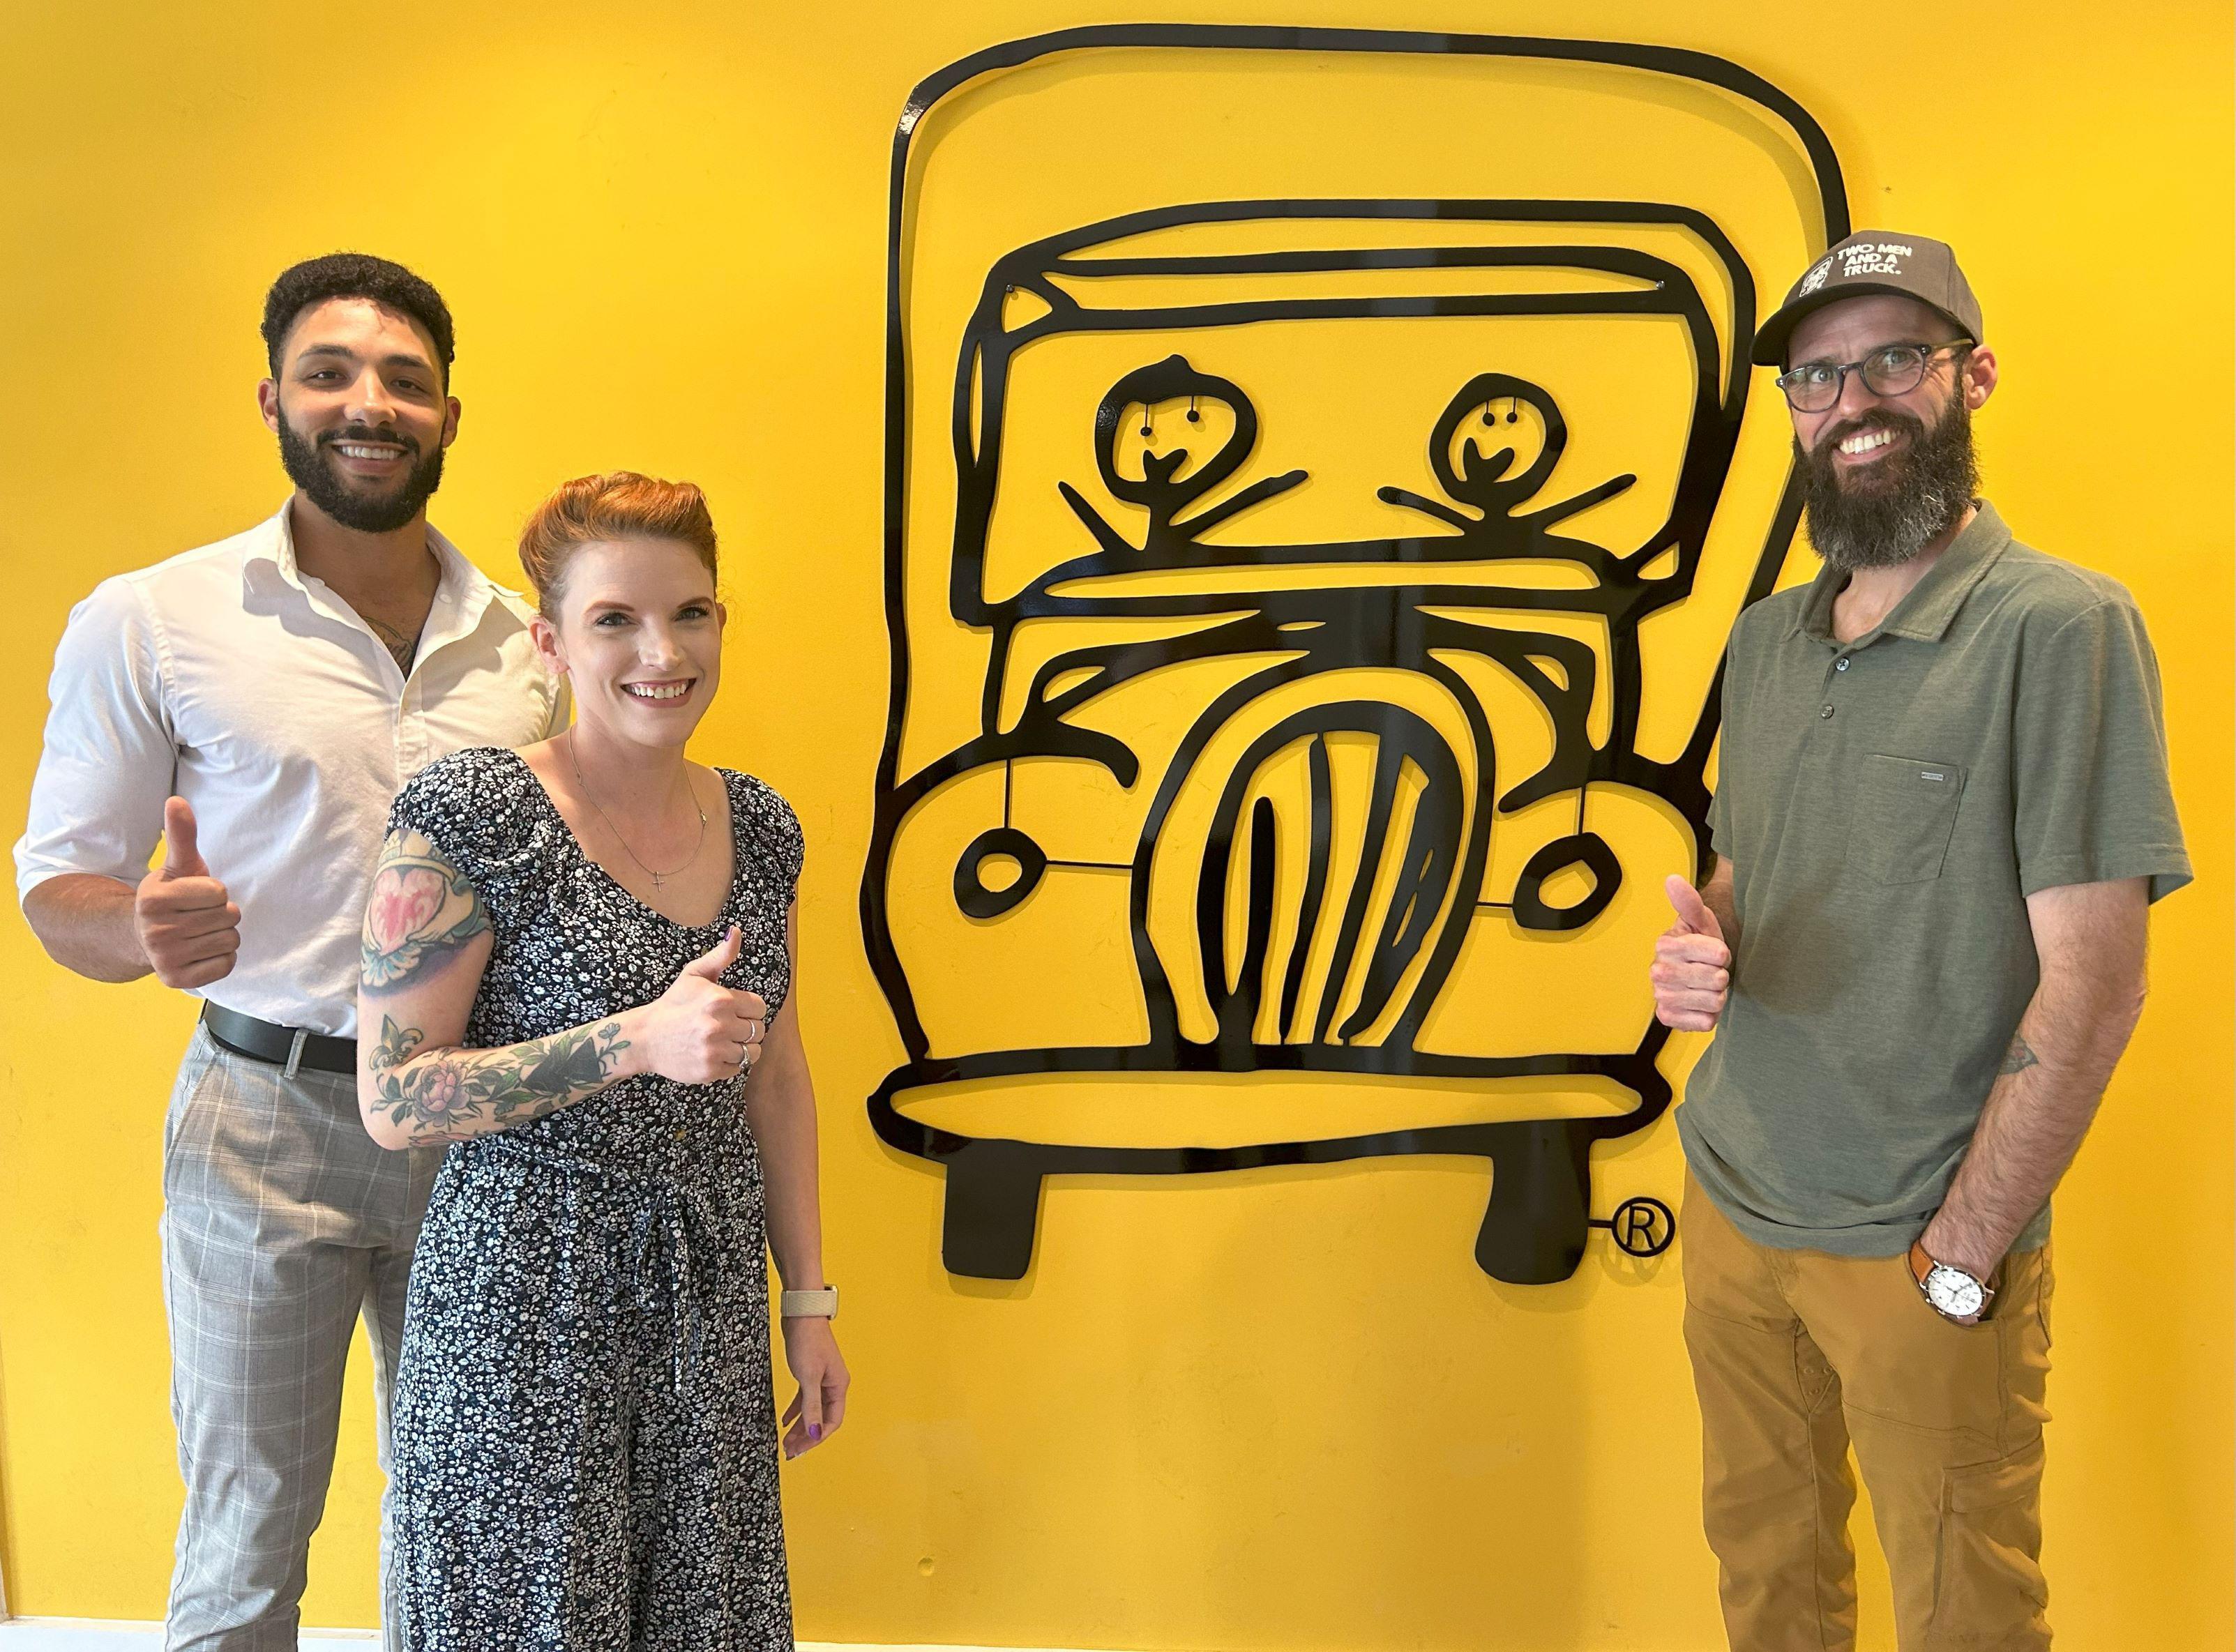 Midtown Atlanta moving team in front of a yellow background with the two men and a truck company logo